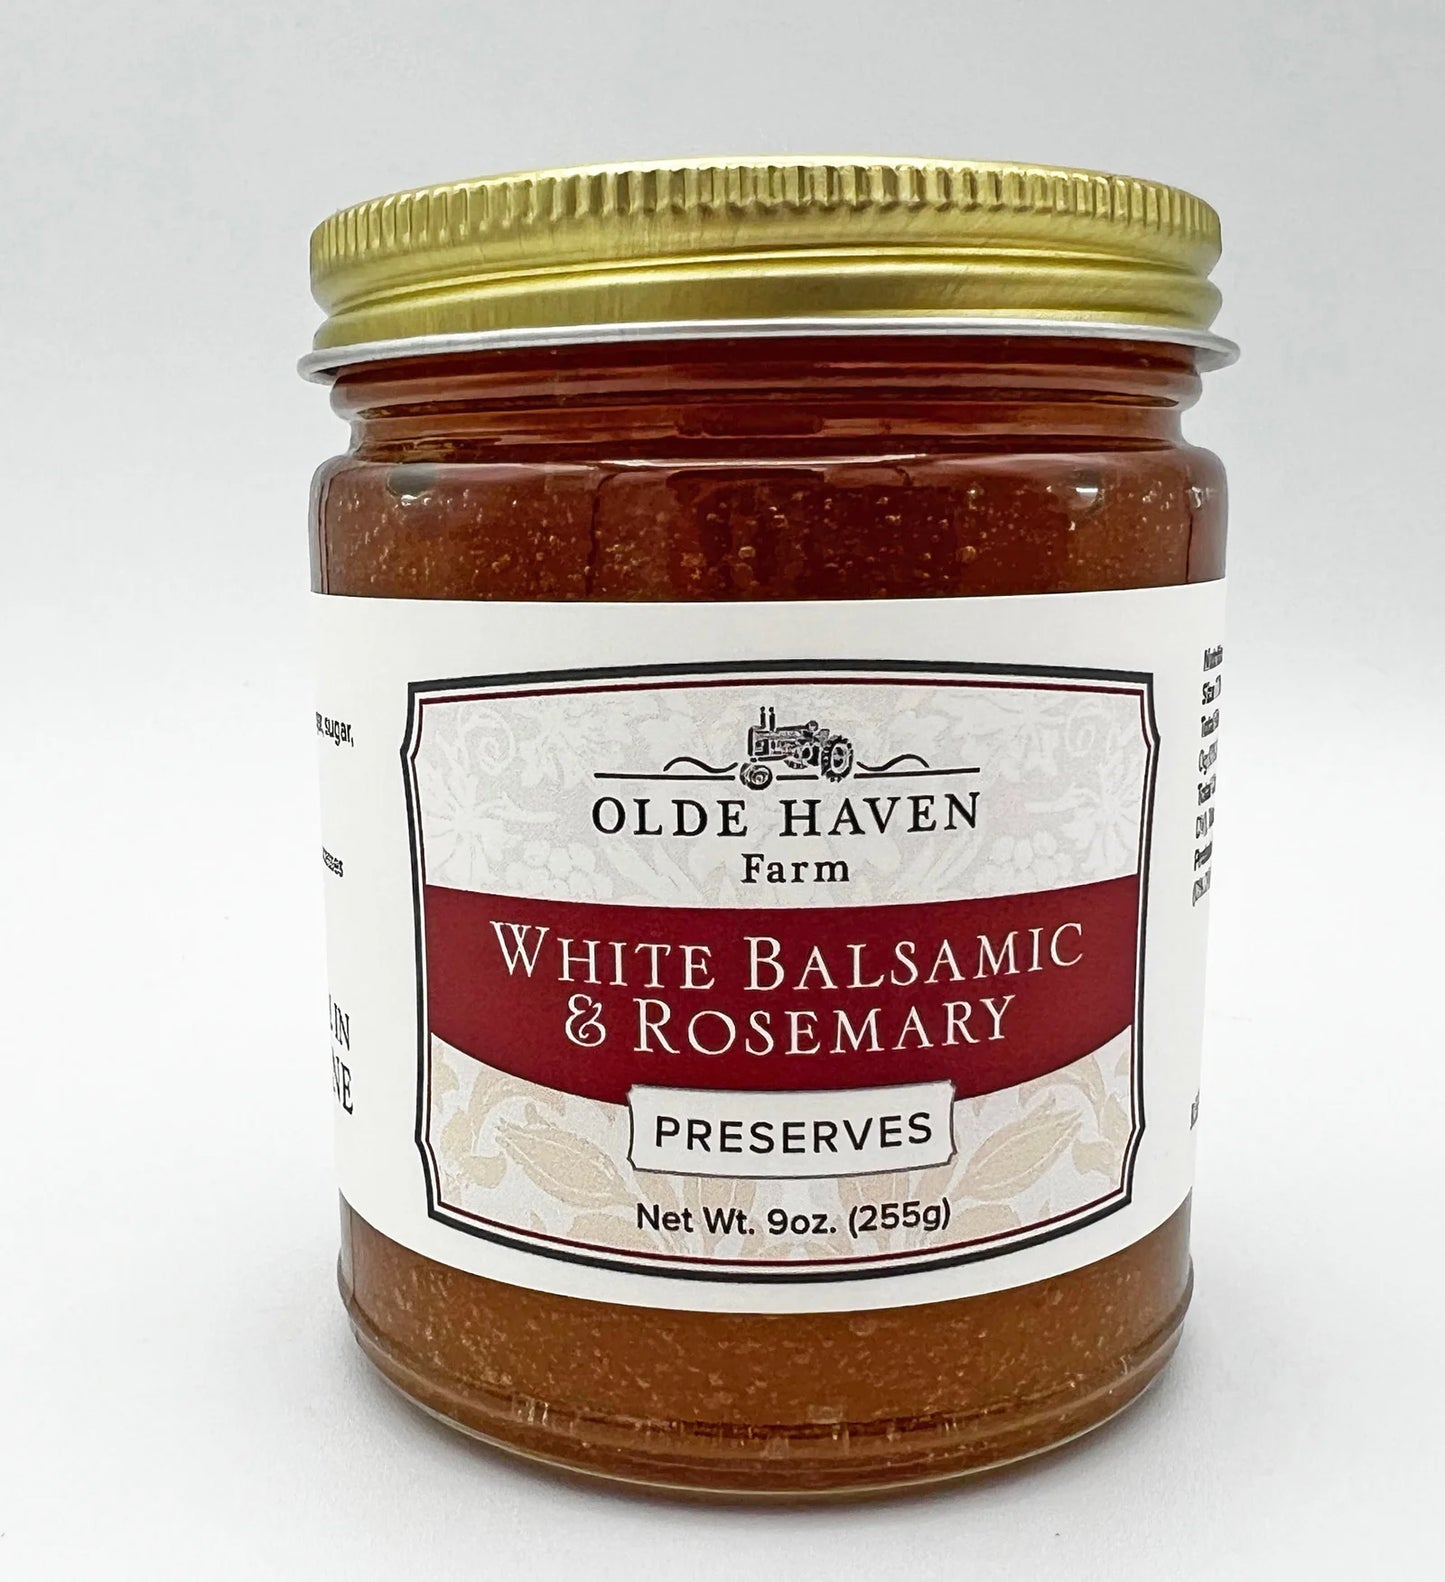 Old Haven Farm White Balsamic and Rosemary